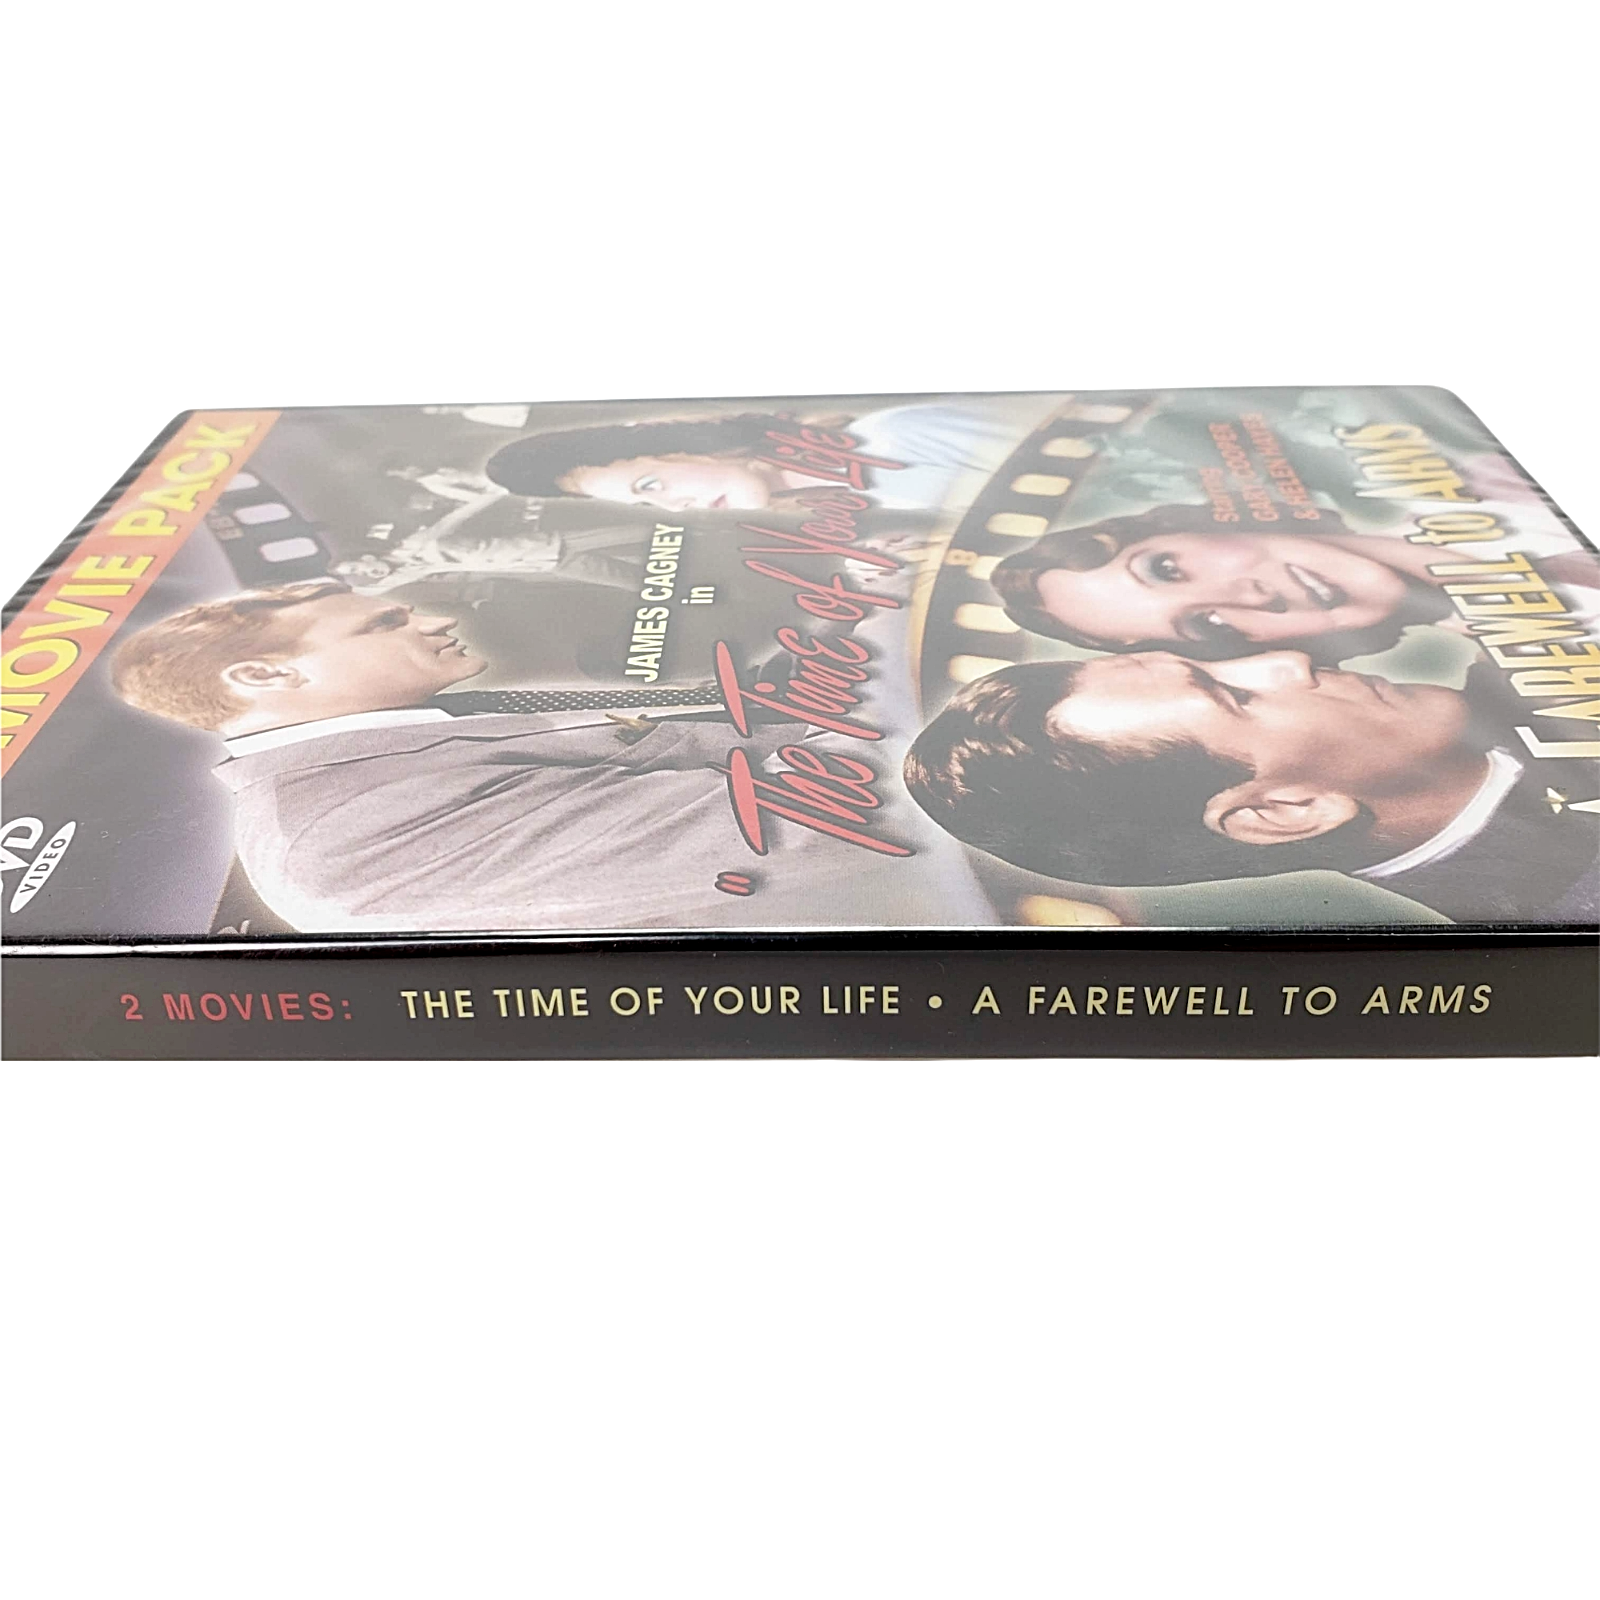 2 MOVIE FEATURES - Pack A Farewell to Arms & The Time of your Life (DVD)